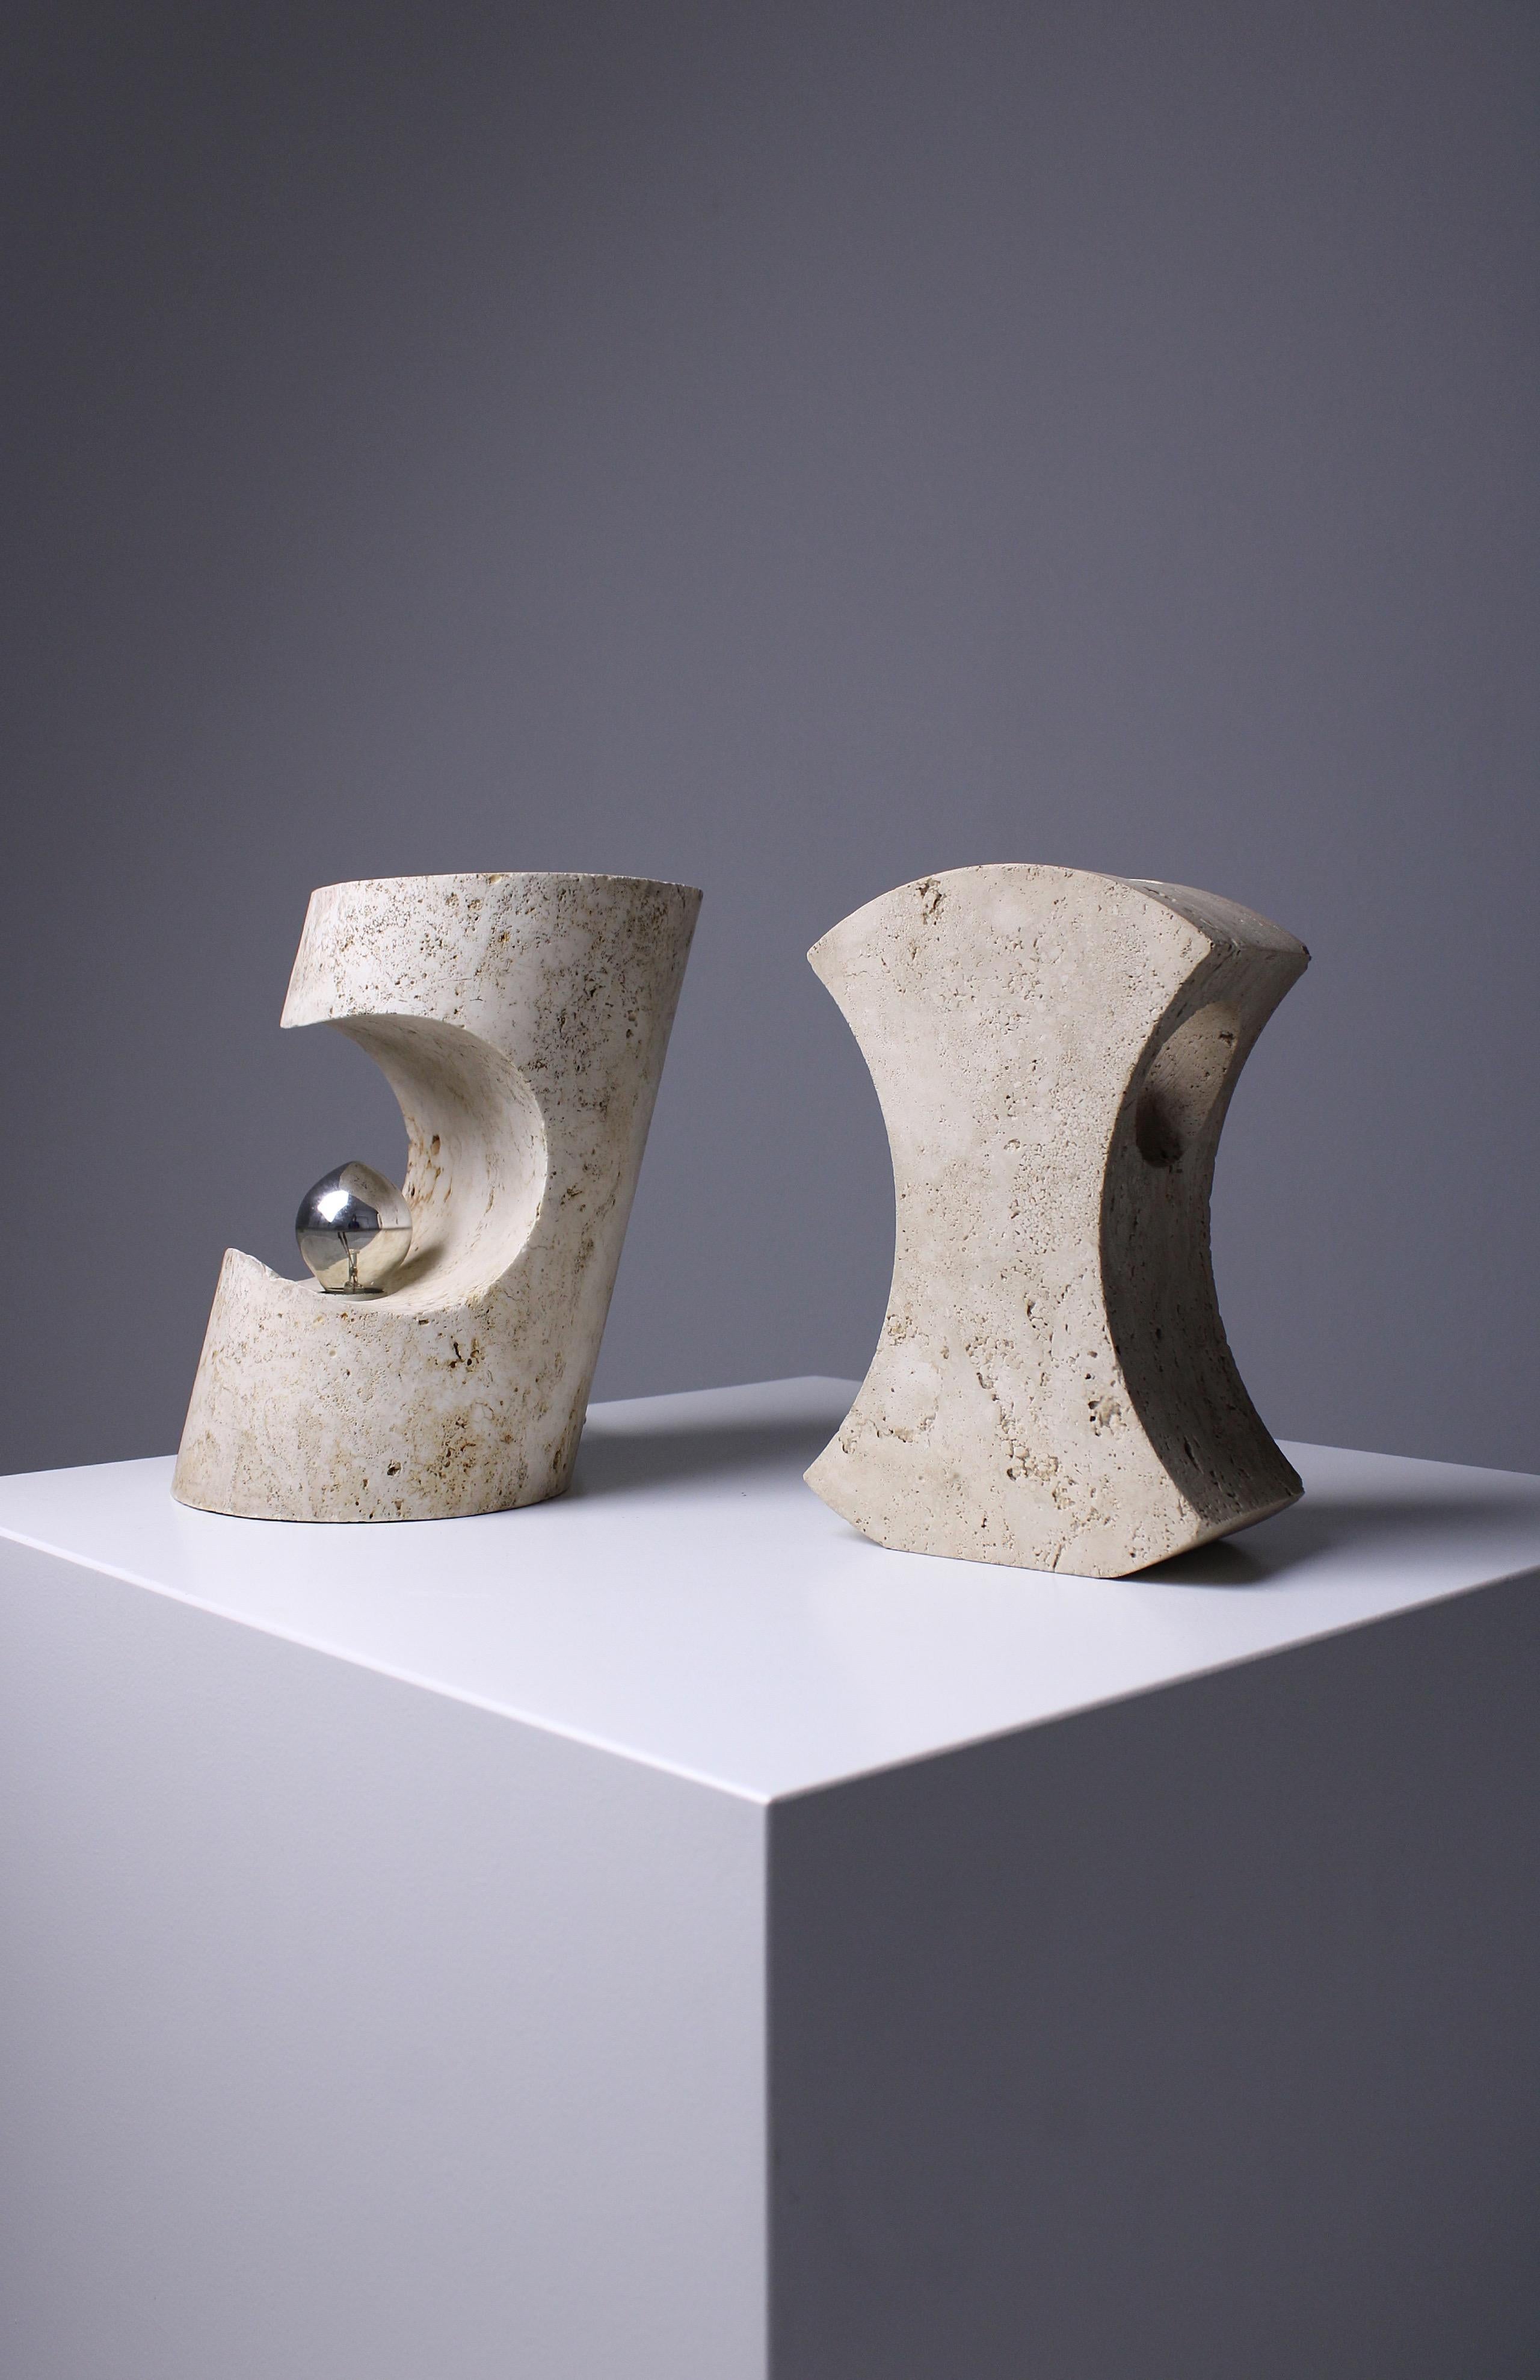 Designed around 1971 by Giuliano Cesari and Enrico Panzeri, these sculptural table lamps were crafted by Nucleo, a division of the Sormani furniture company in Milan, Italy. Both are made entirely from a single piece of unfilled travertine, the